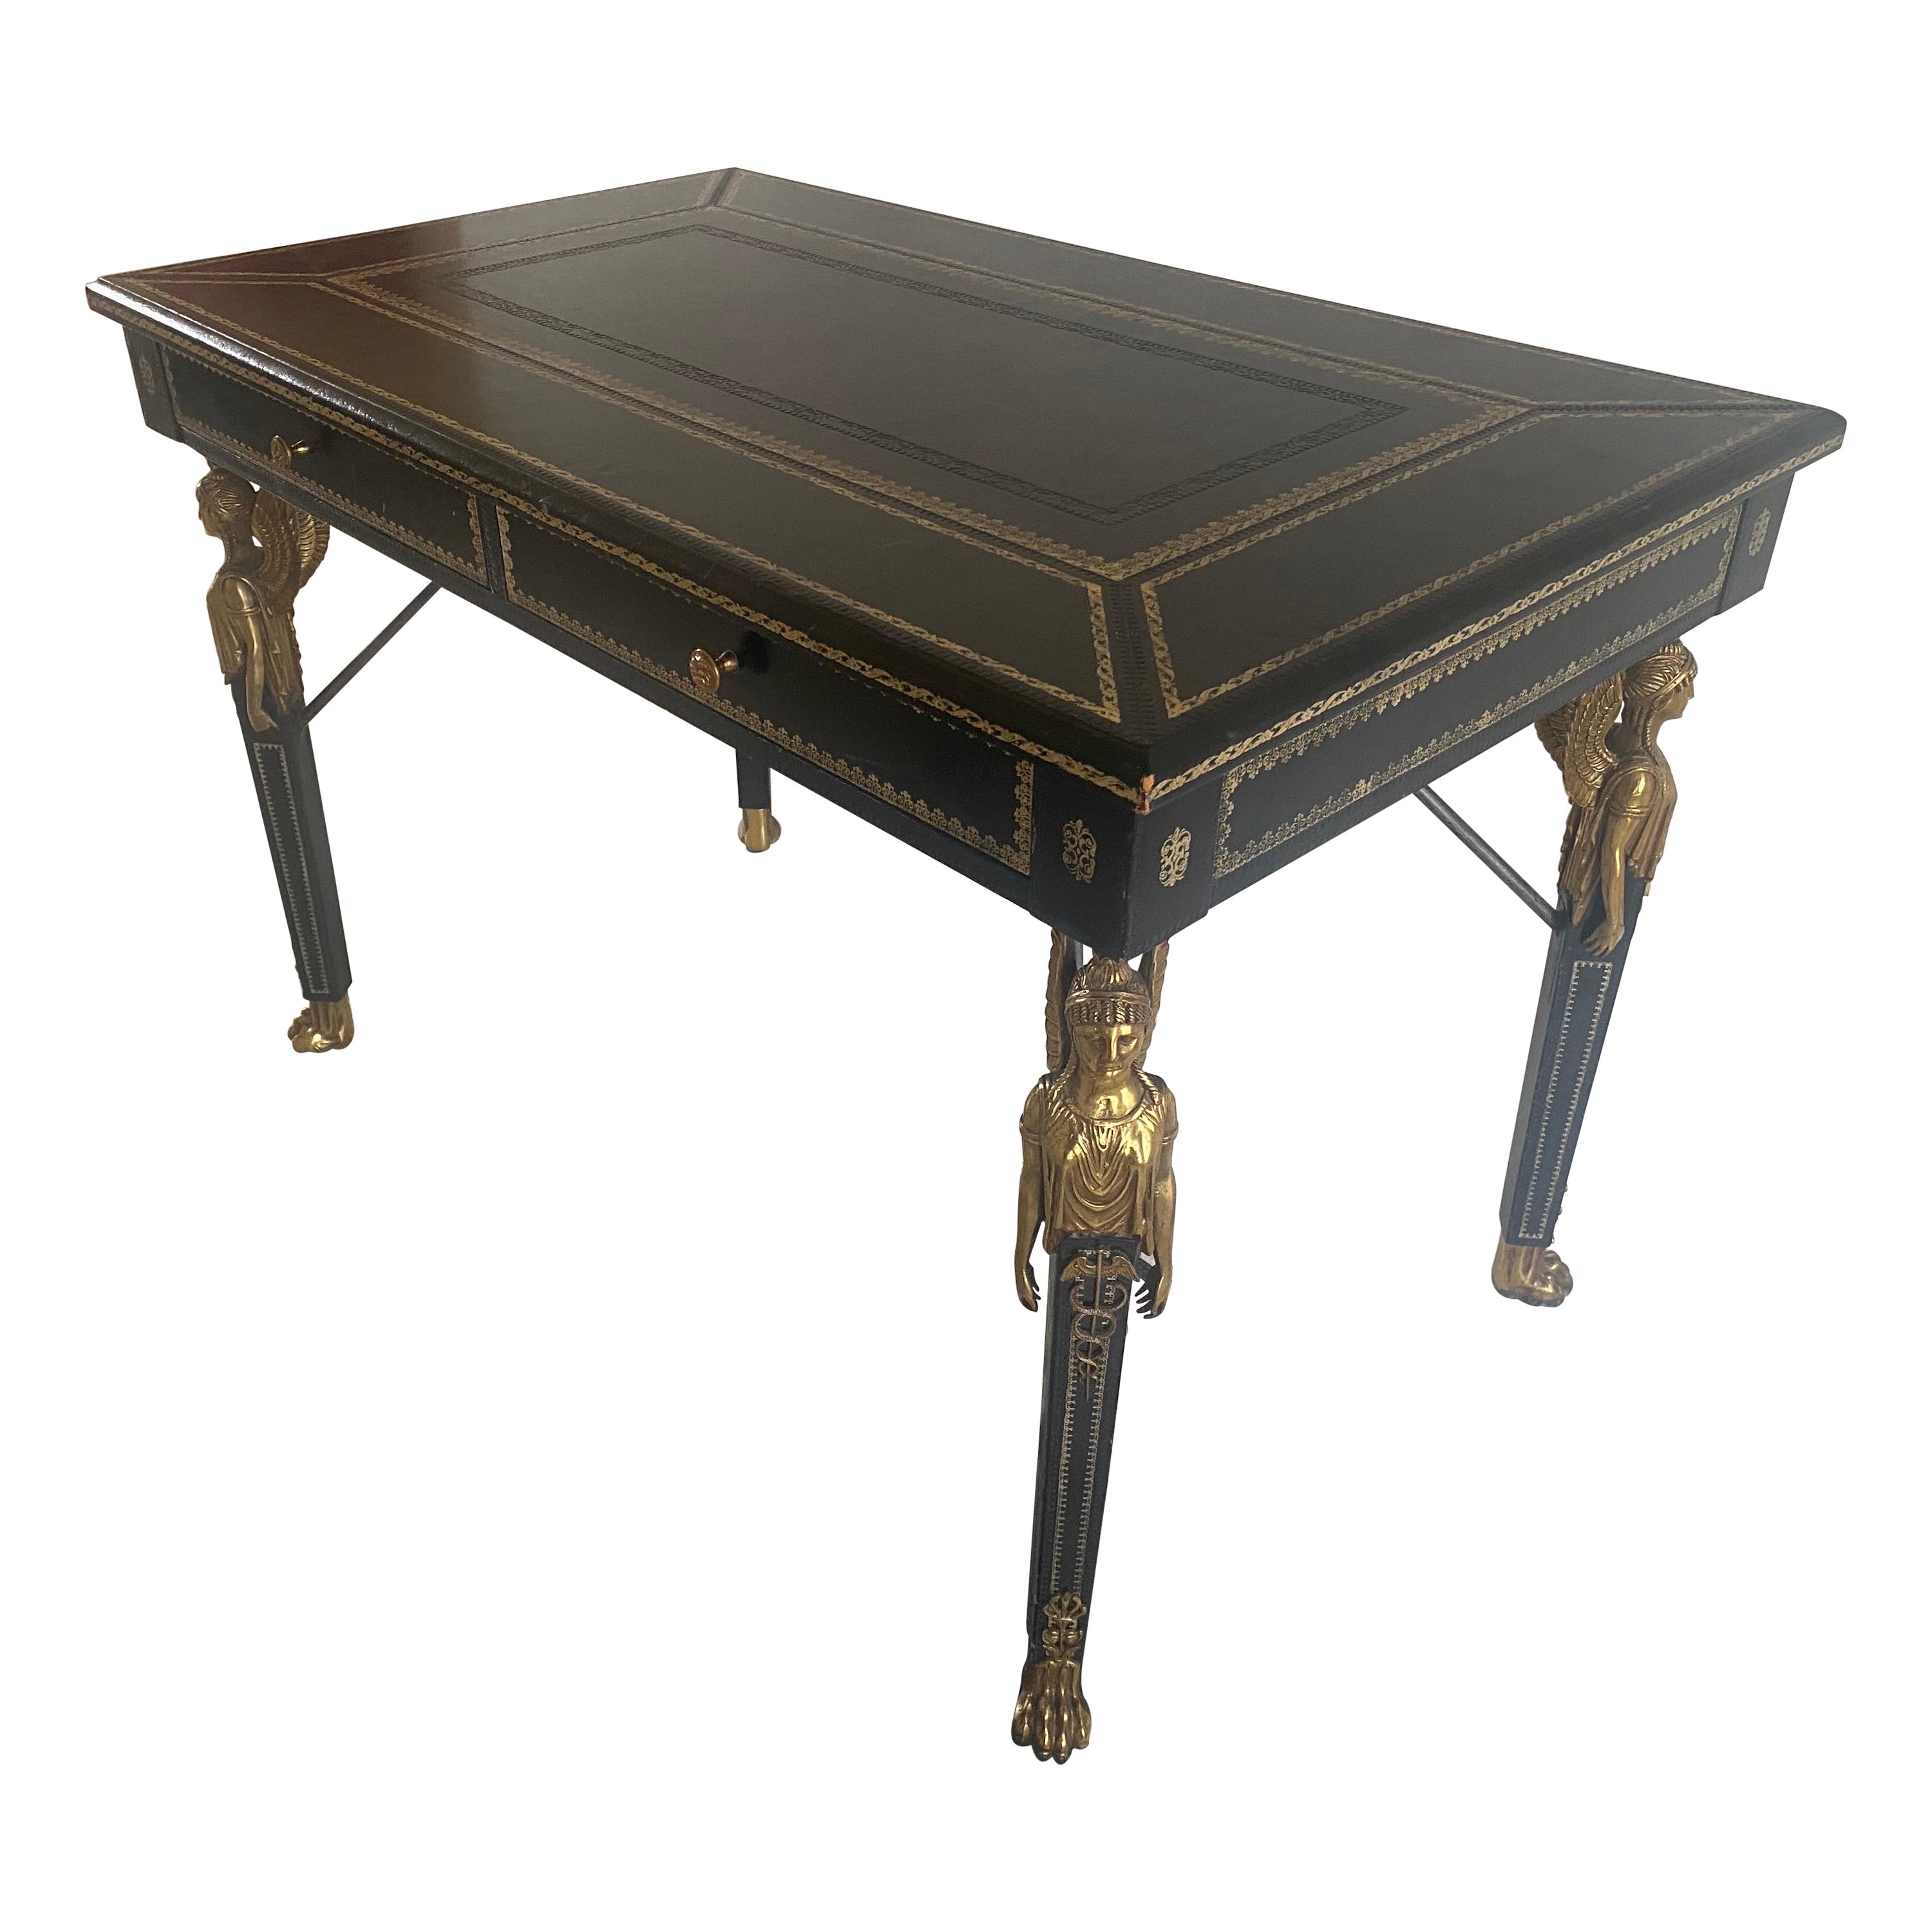 Maitland Smith Neoclassical Black Leather and Bronze Desk